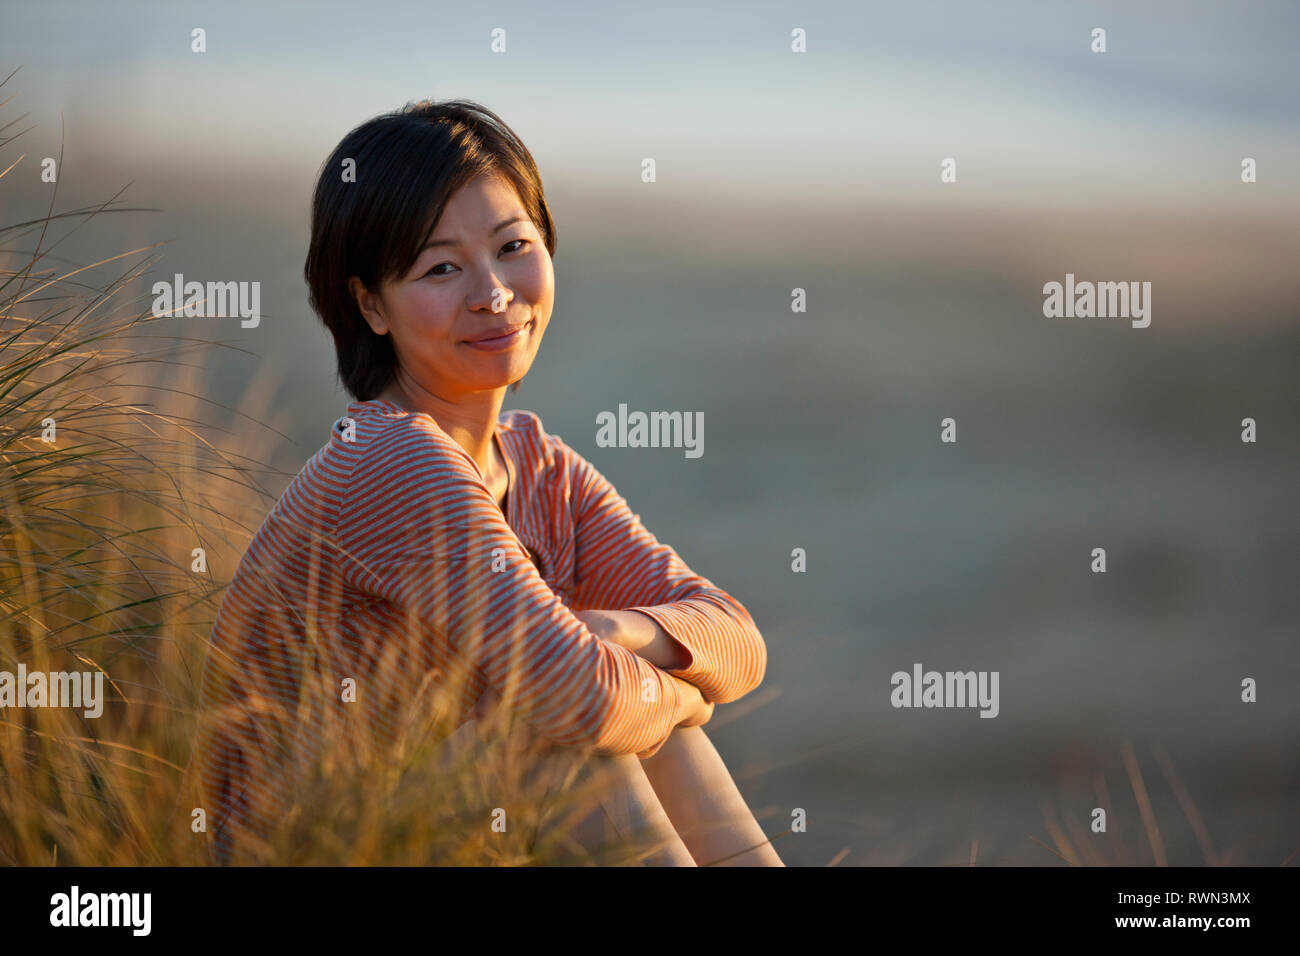 Portrait of a content young woman sitting on a beach. Stock Photo